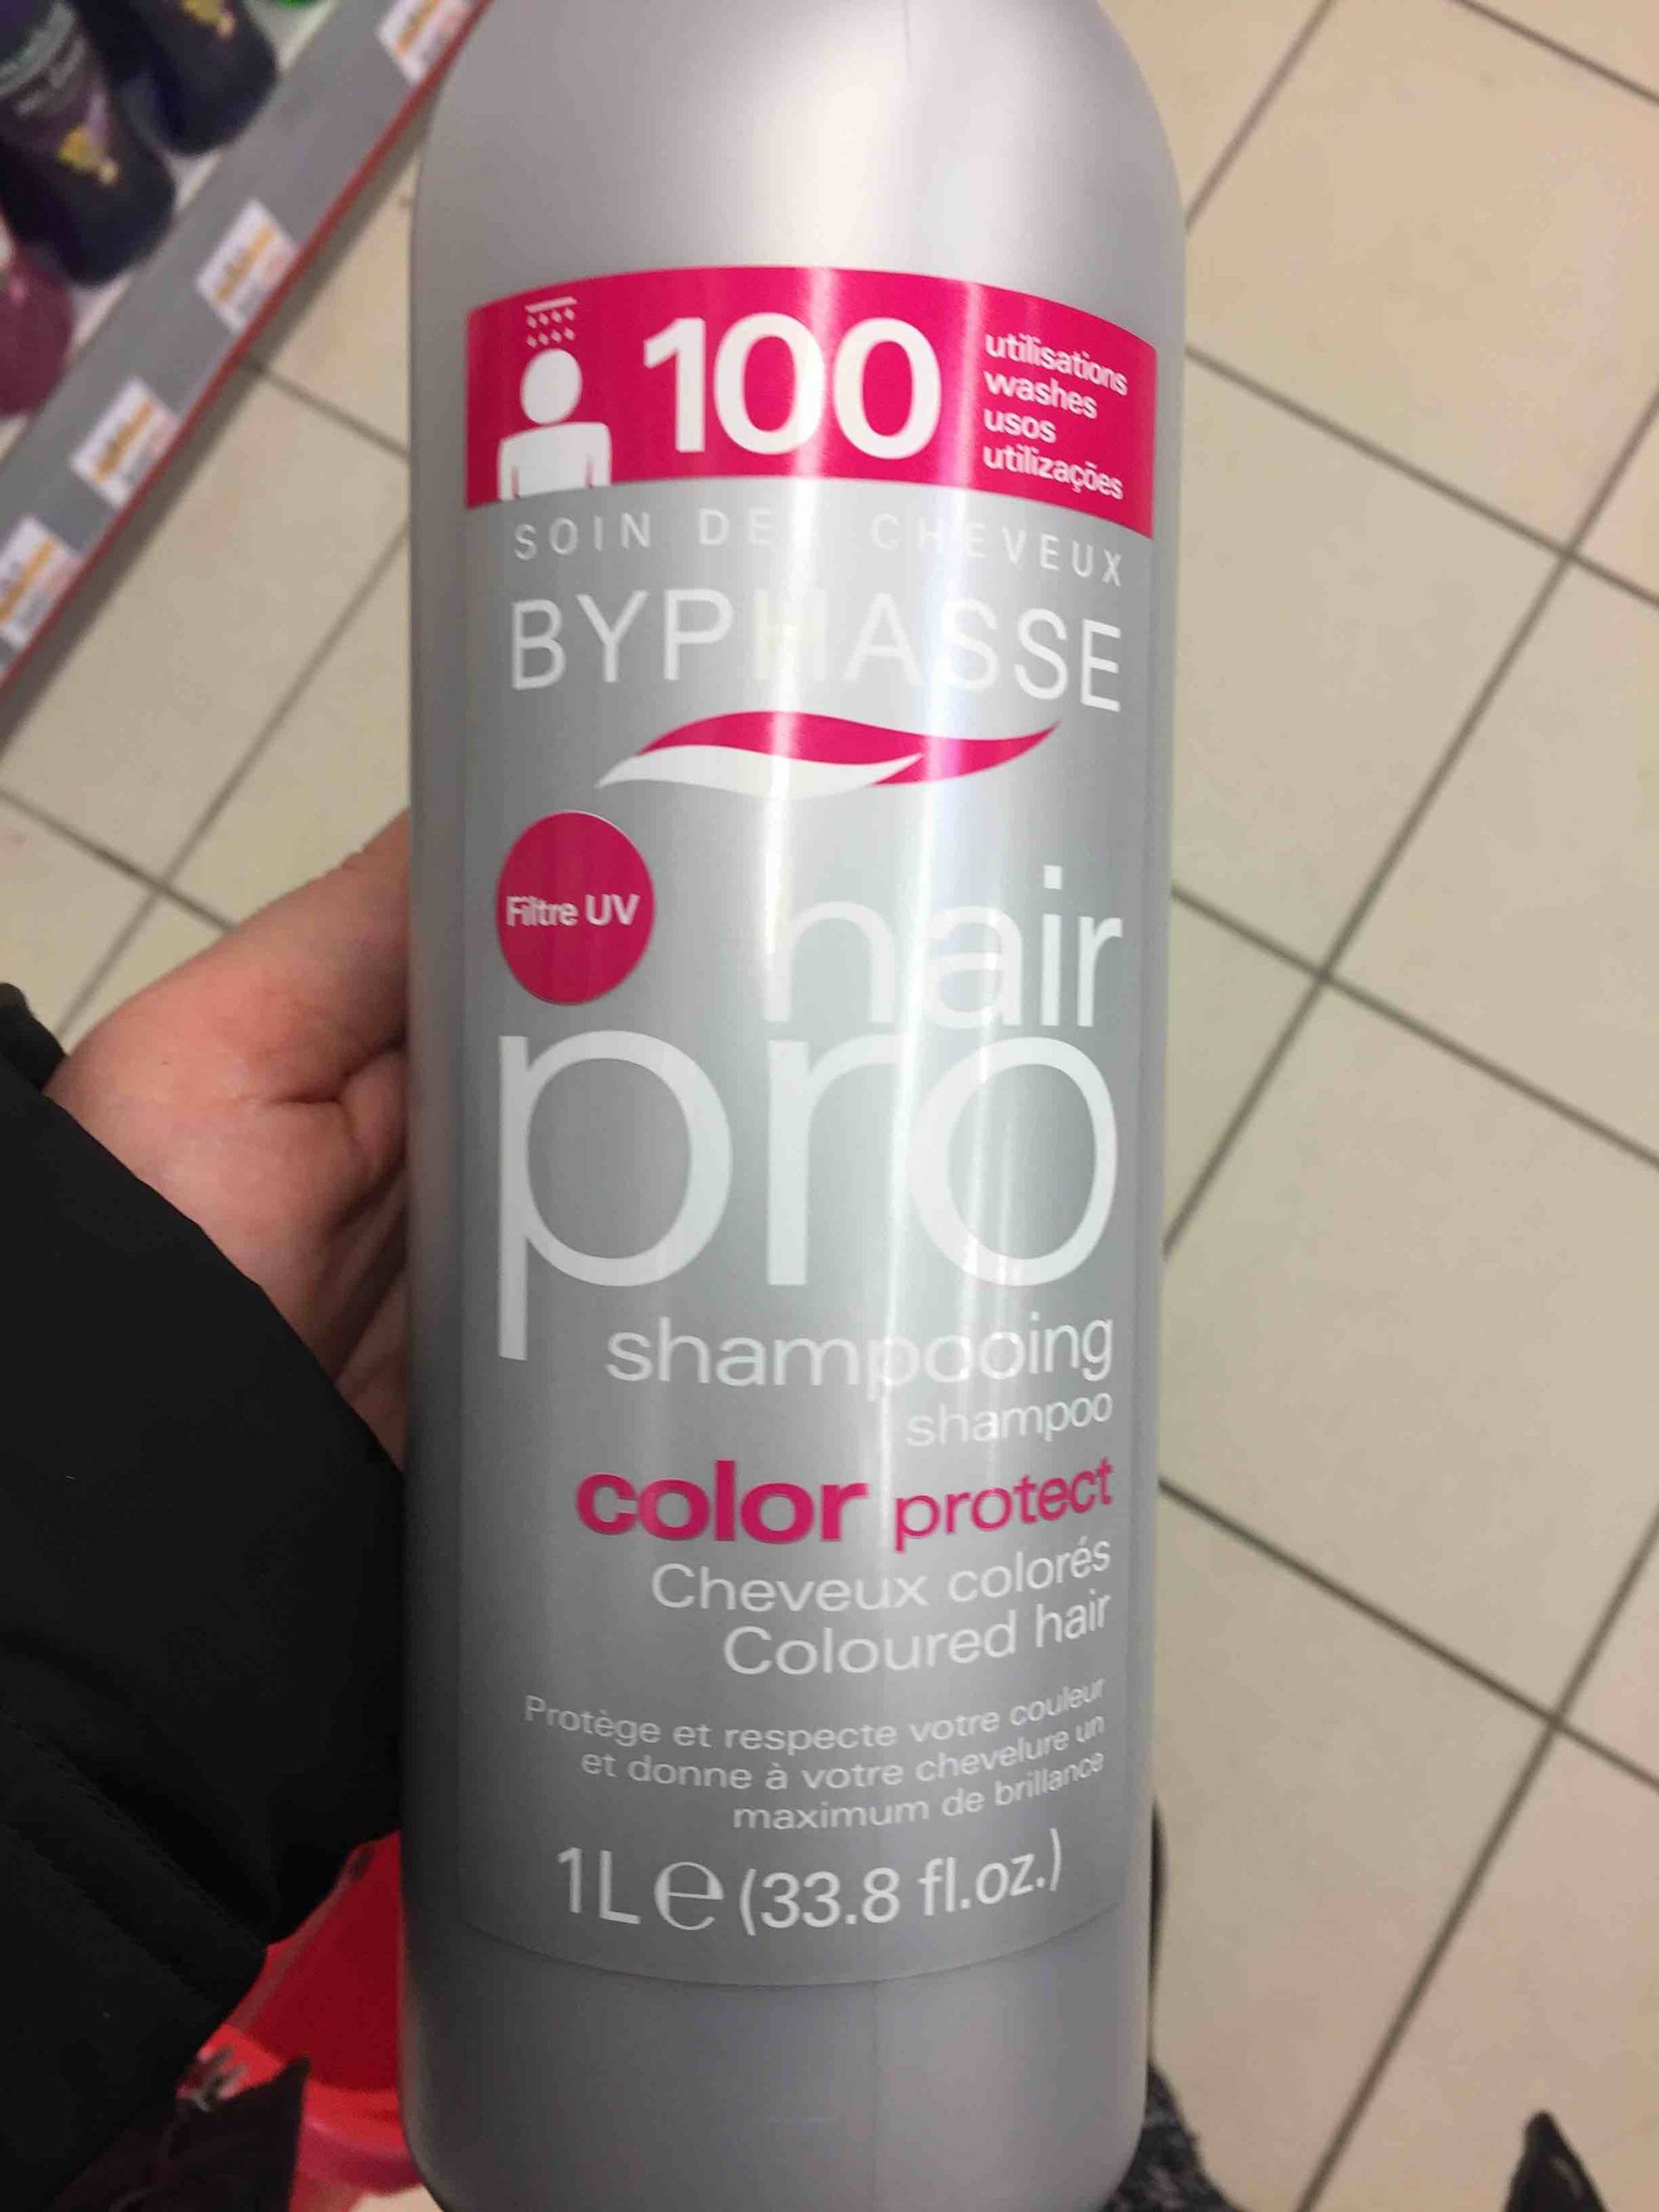 BYPHASSE - Hair pro - Shampooing color protect